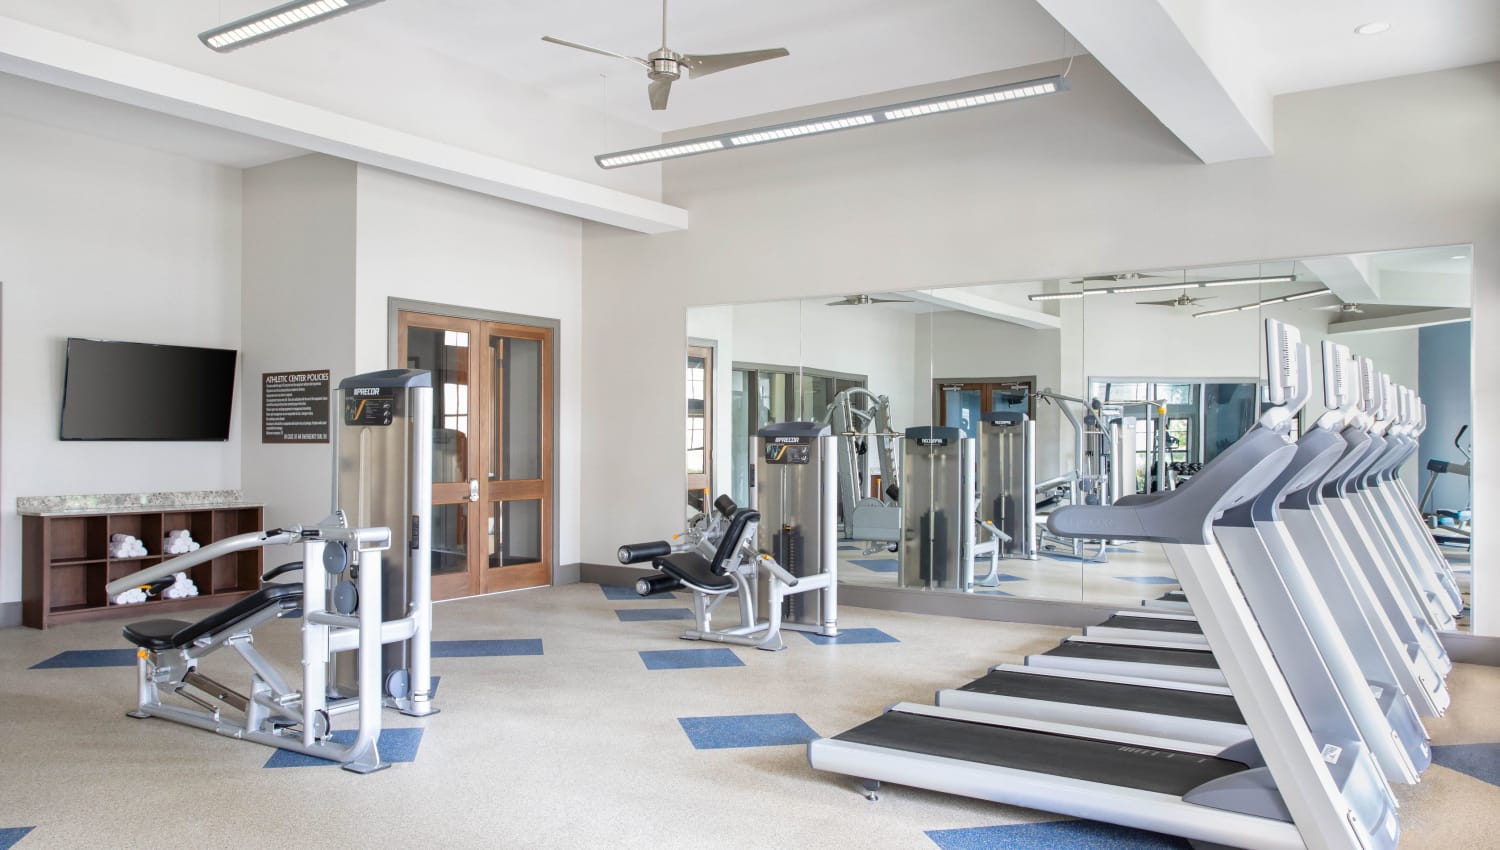 Treadmills and free weights in the gym at Olympus Falcon Landing in Katy, Texas